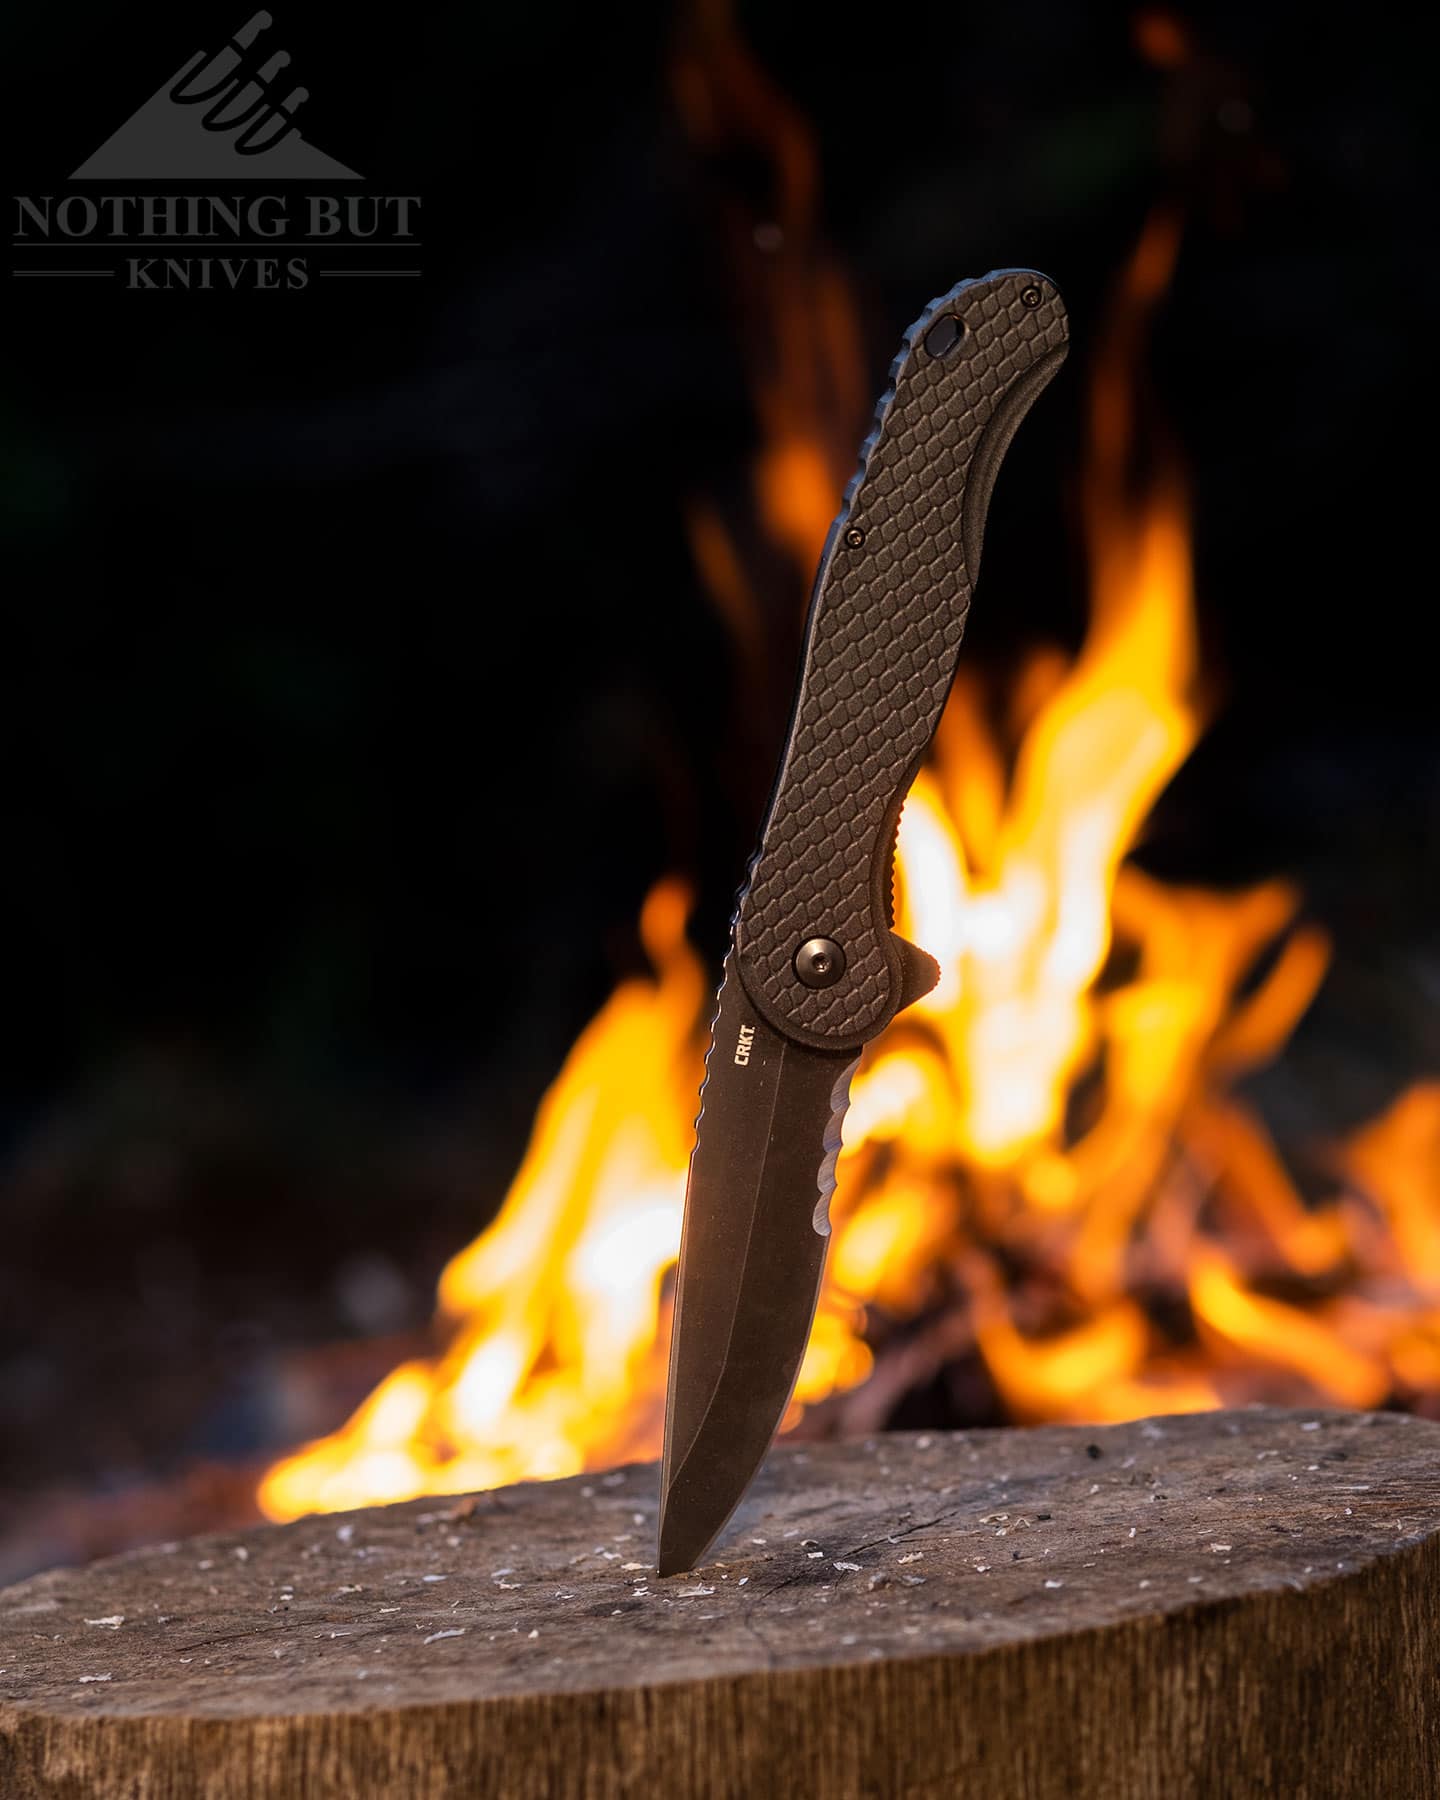 The CRKT Taco Viper won a Drunken Hillbilly Award for the Most Practical EDC Knife With A Fun Name